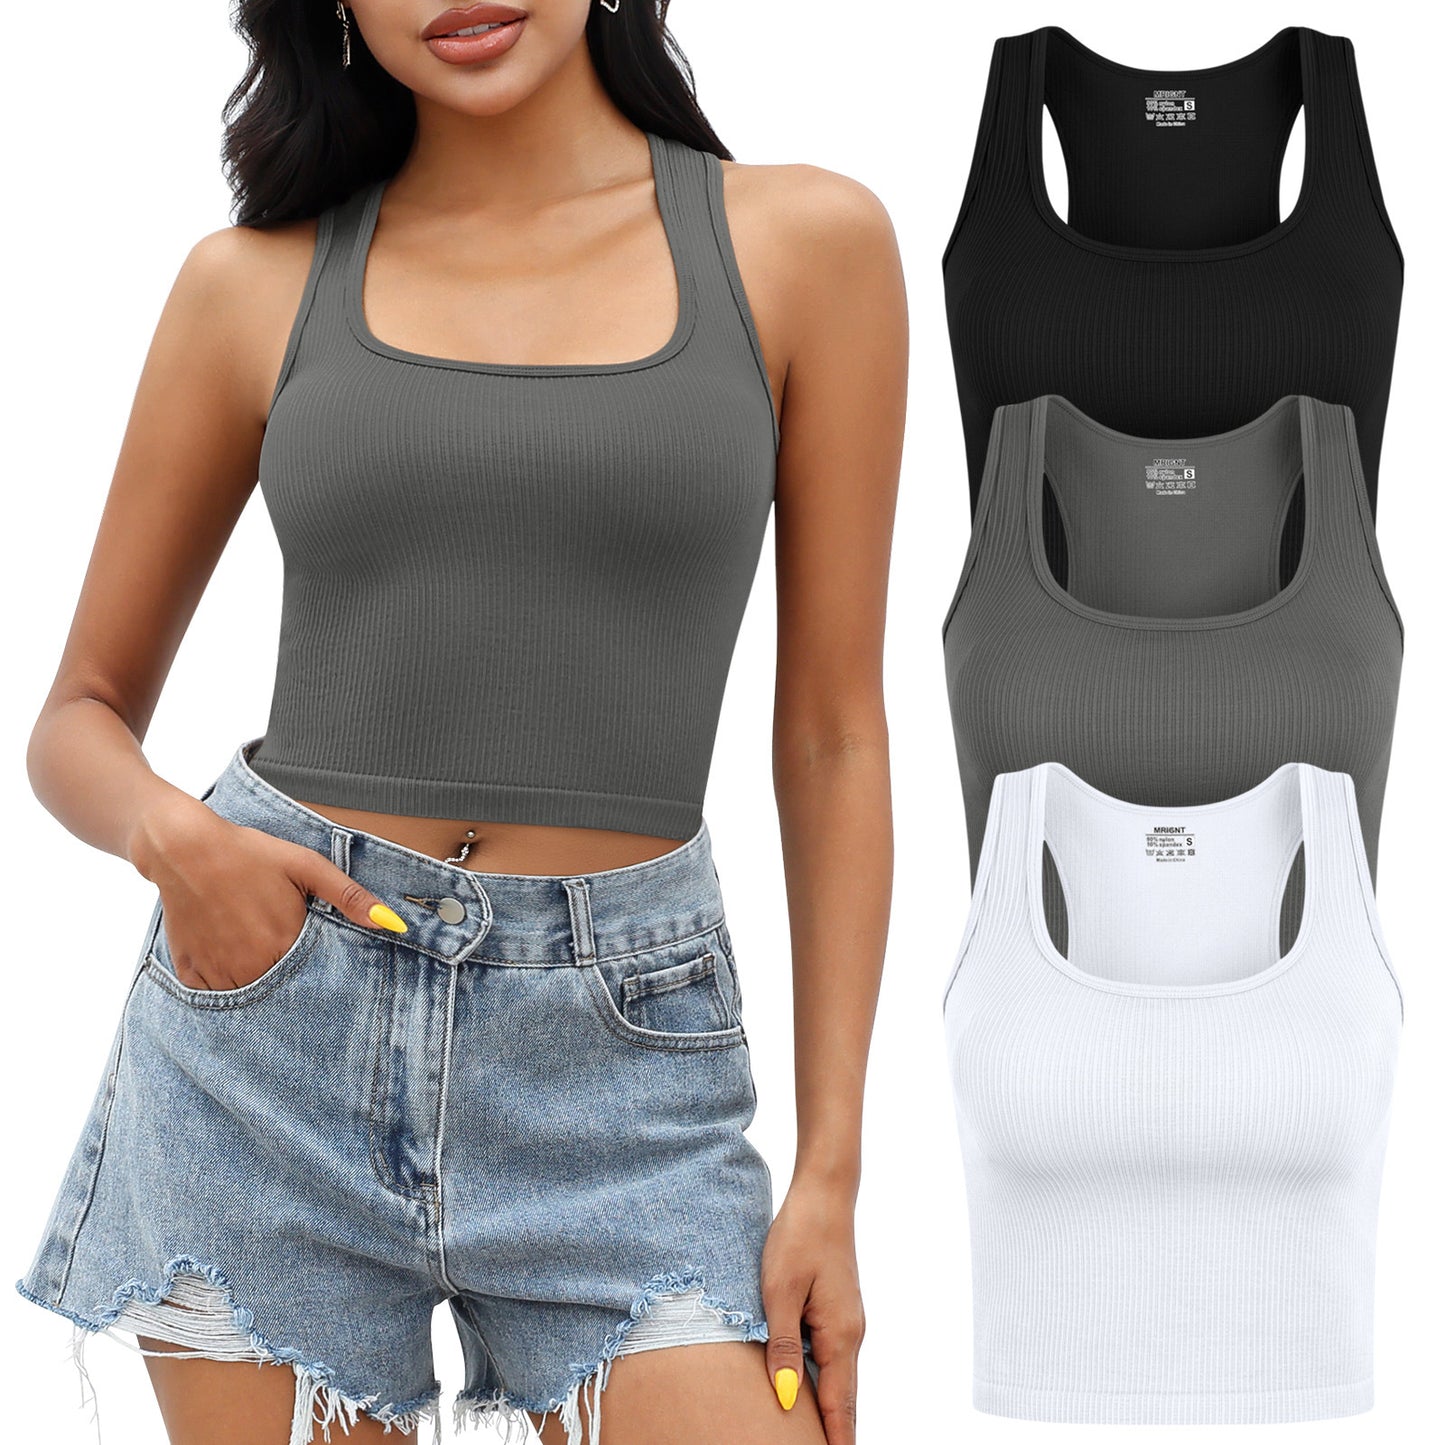 Tank Top for Women, 3 Pack Ribbed Seamless Racerback Yoga Crop Tops for Workout Running Gym Sport, Sleeveless Exercise Shirt for Daily Wearing